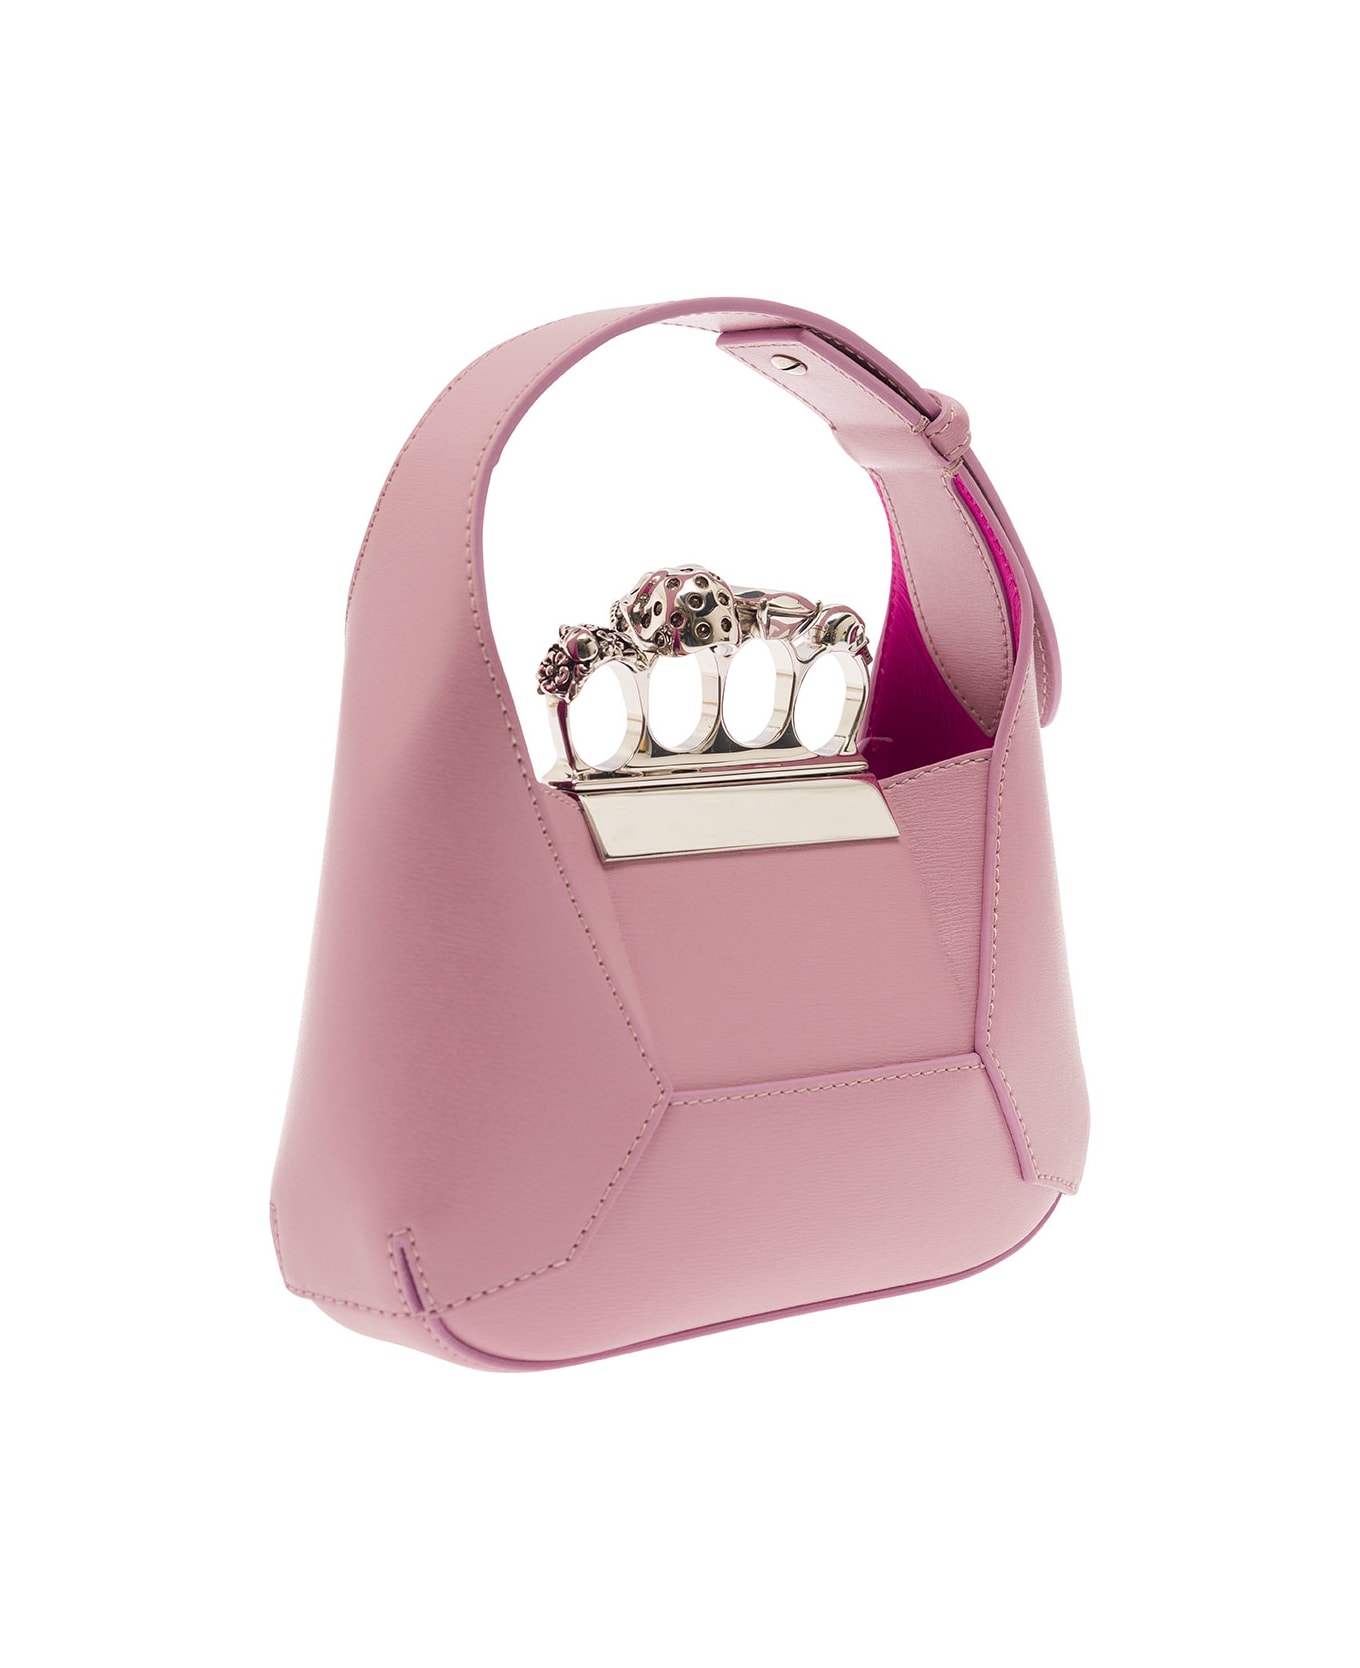 Alexander McQueen 'jewelled' Pink Hobo Bag With Four Rings Detail And Chain In Leather Woman - Pink